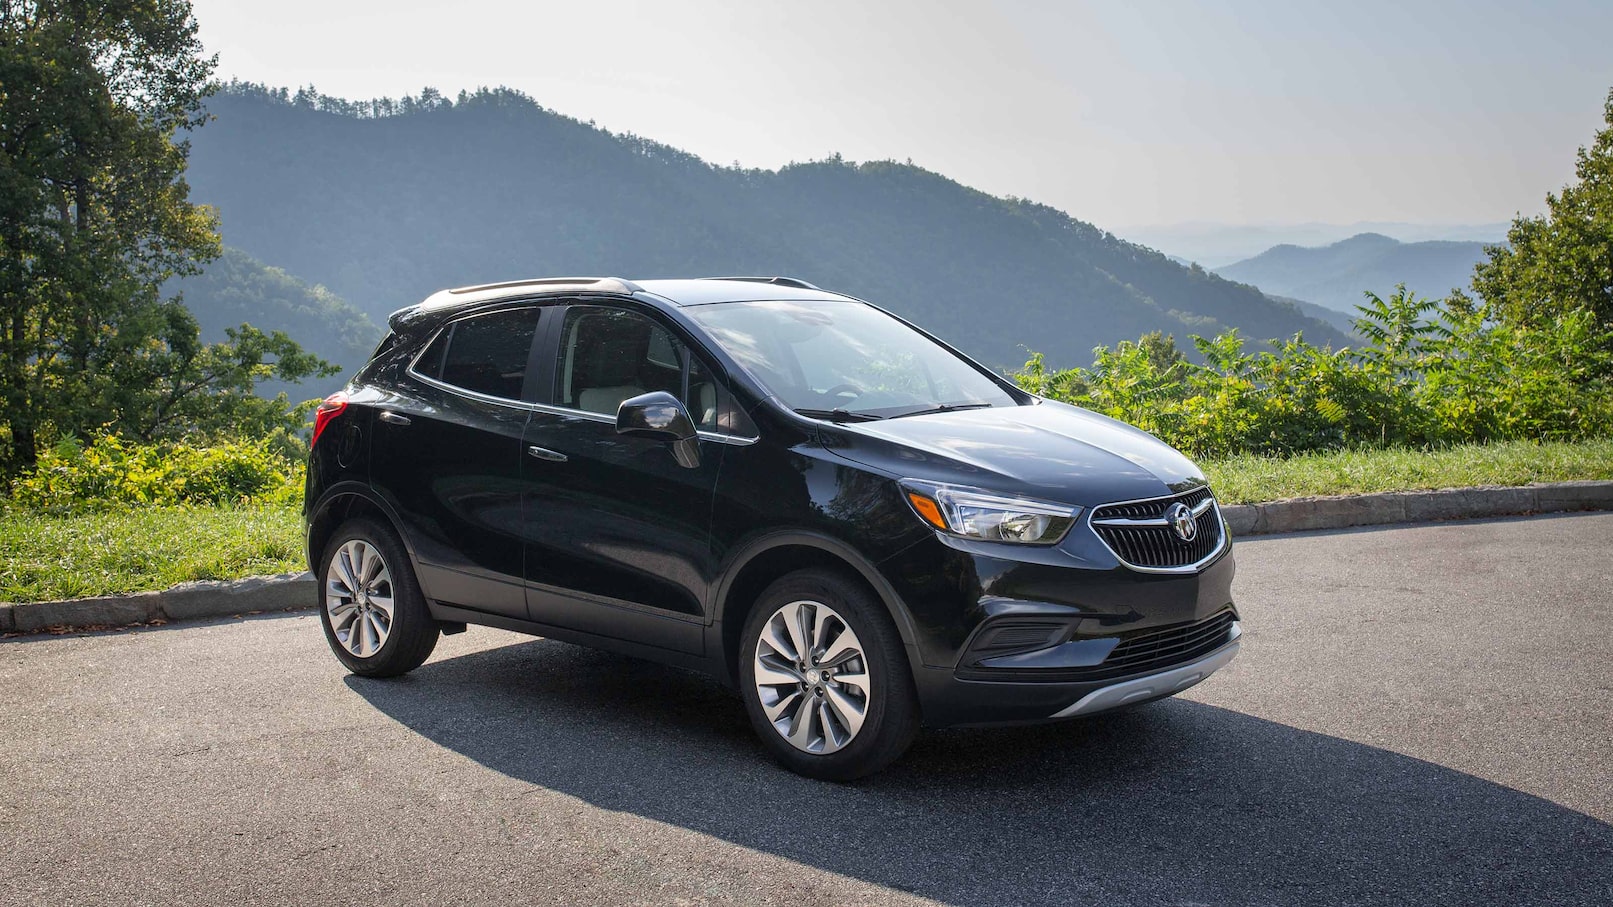 Buick Encore Trim Levels Explained (2021) | Reed Buick GMC